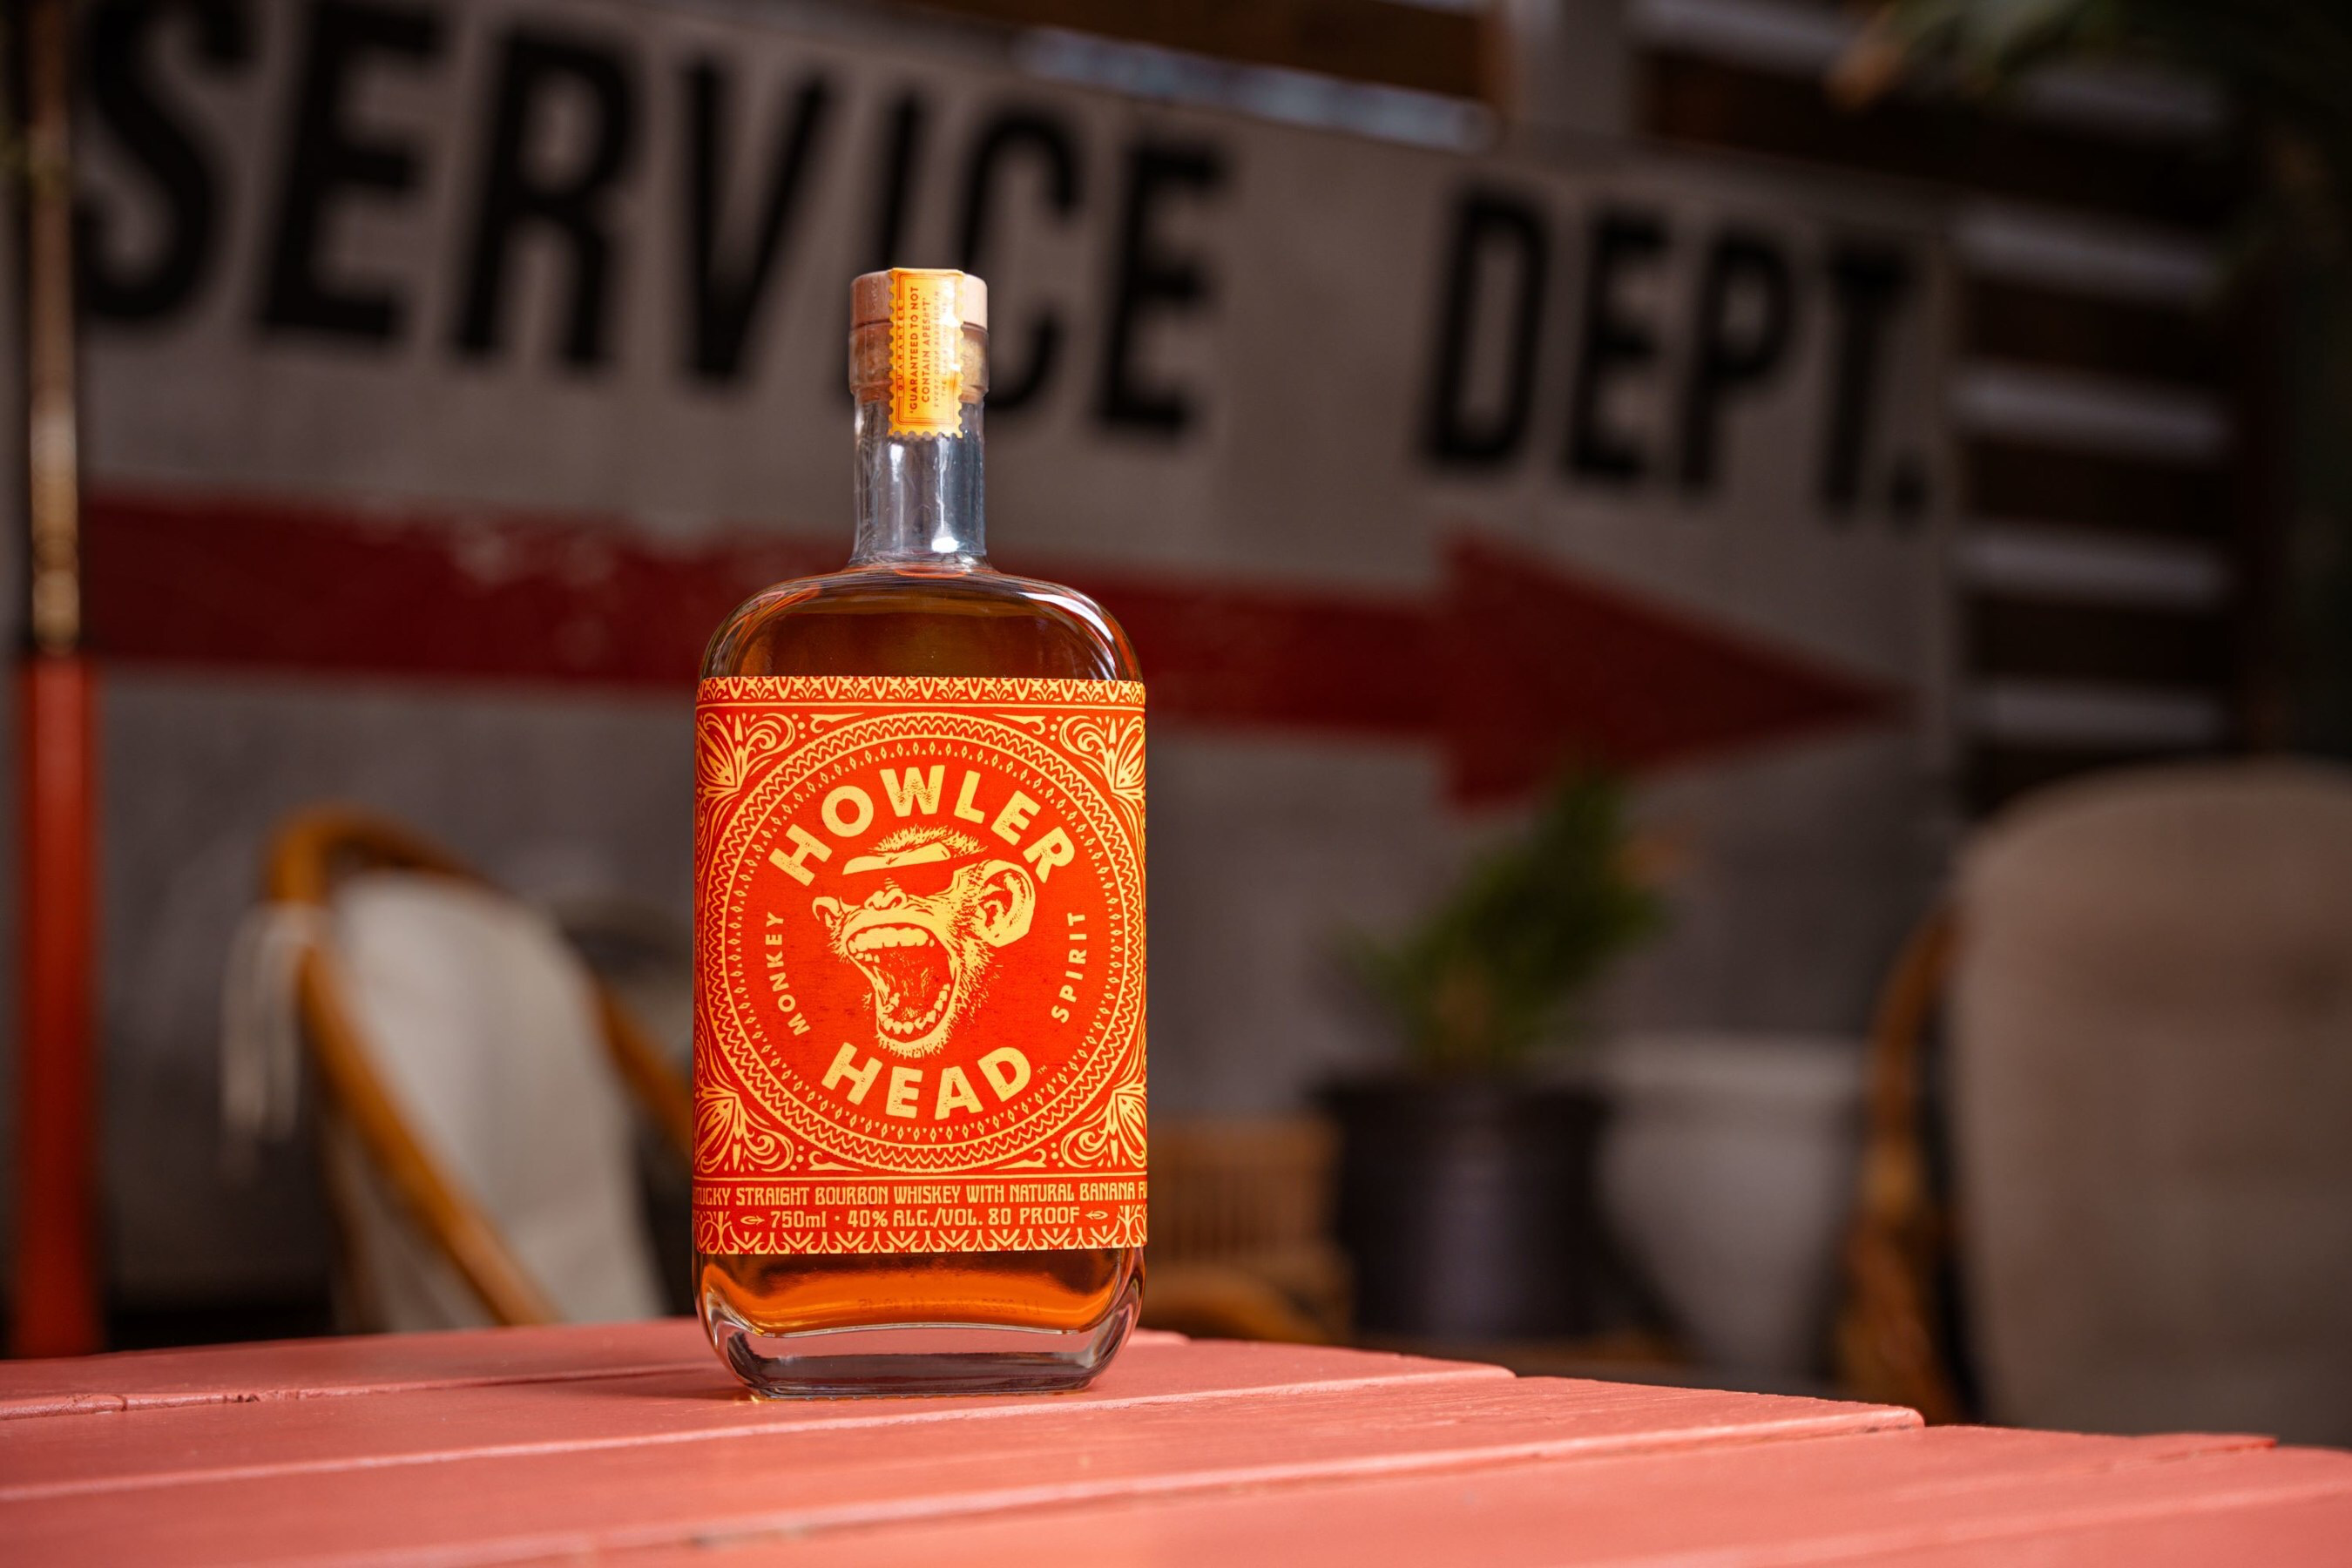 Howler Head Continues as “Official Flavored Bourbon Whiskey of UFC”